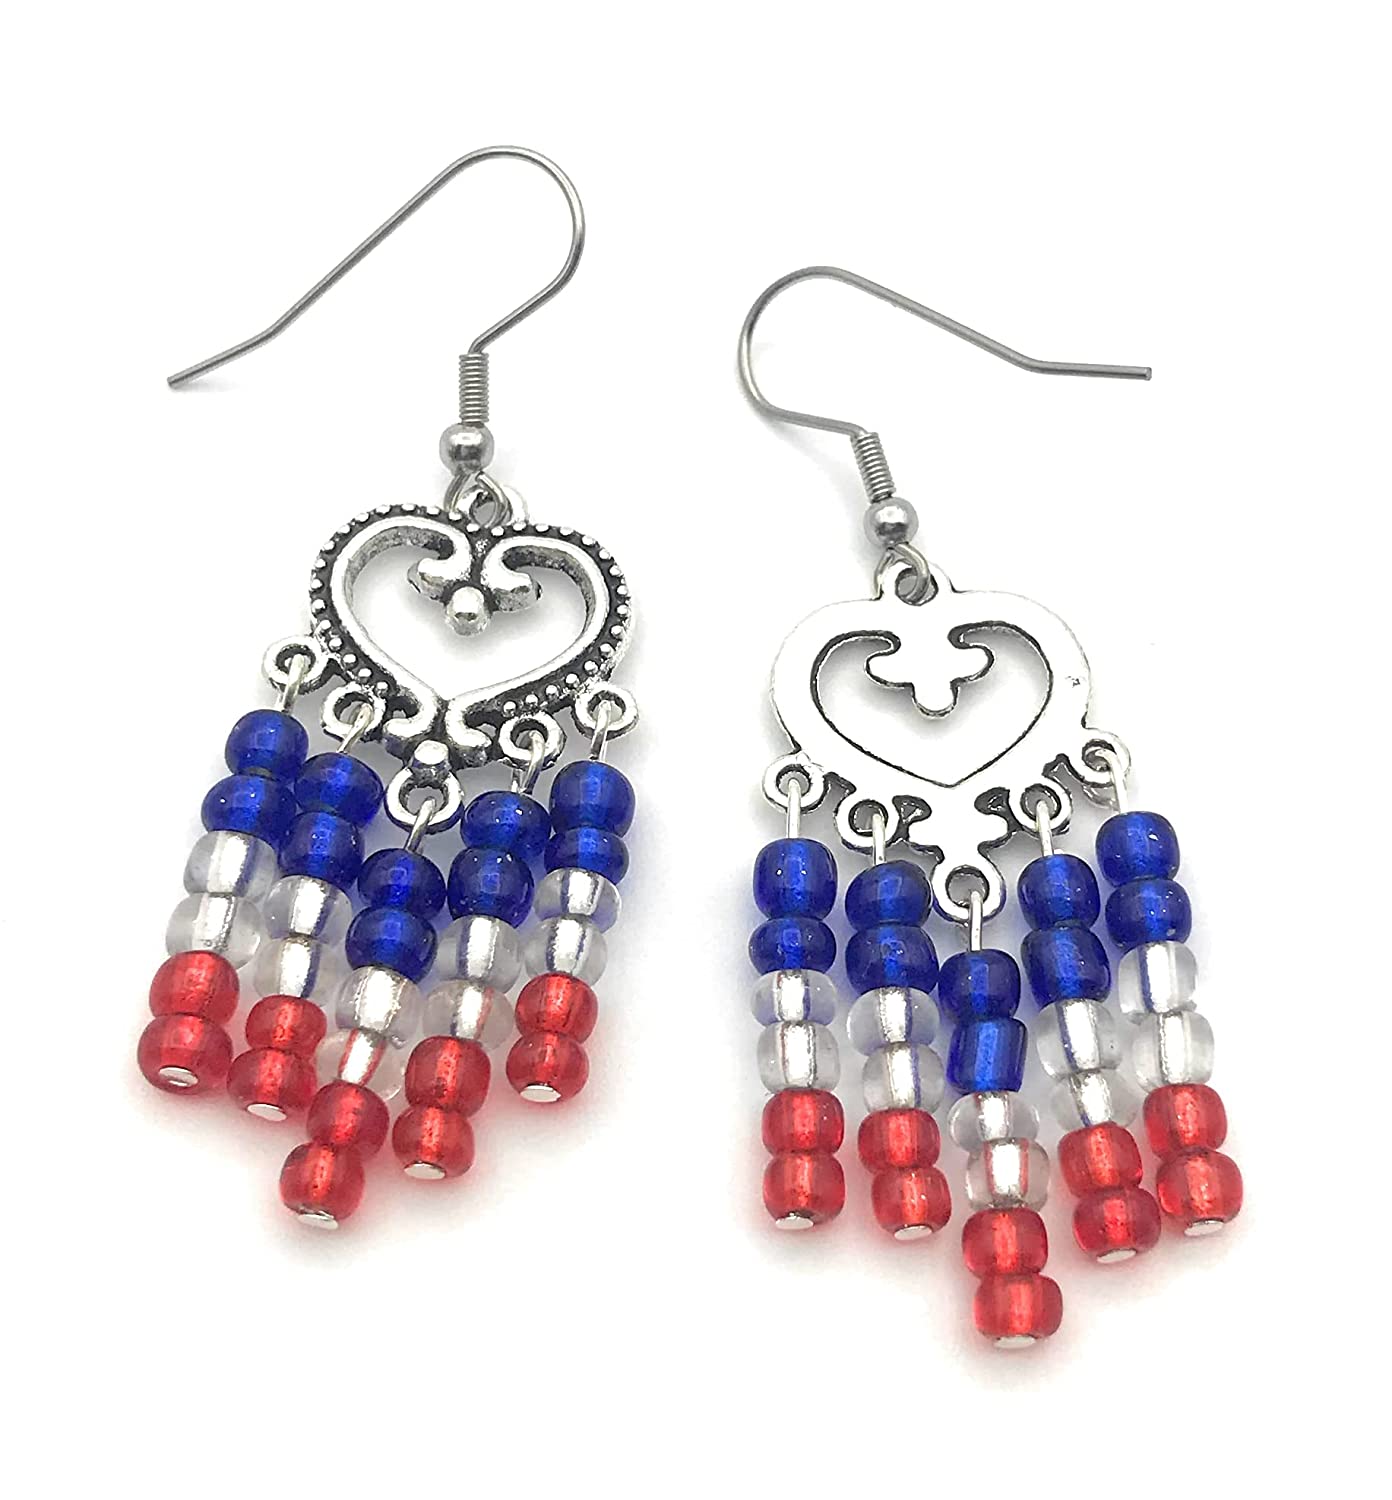 Red White and Blue Earrings Front and Back View from Scott D Jewelry Designs